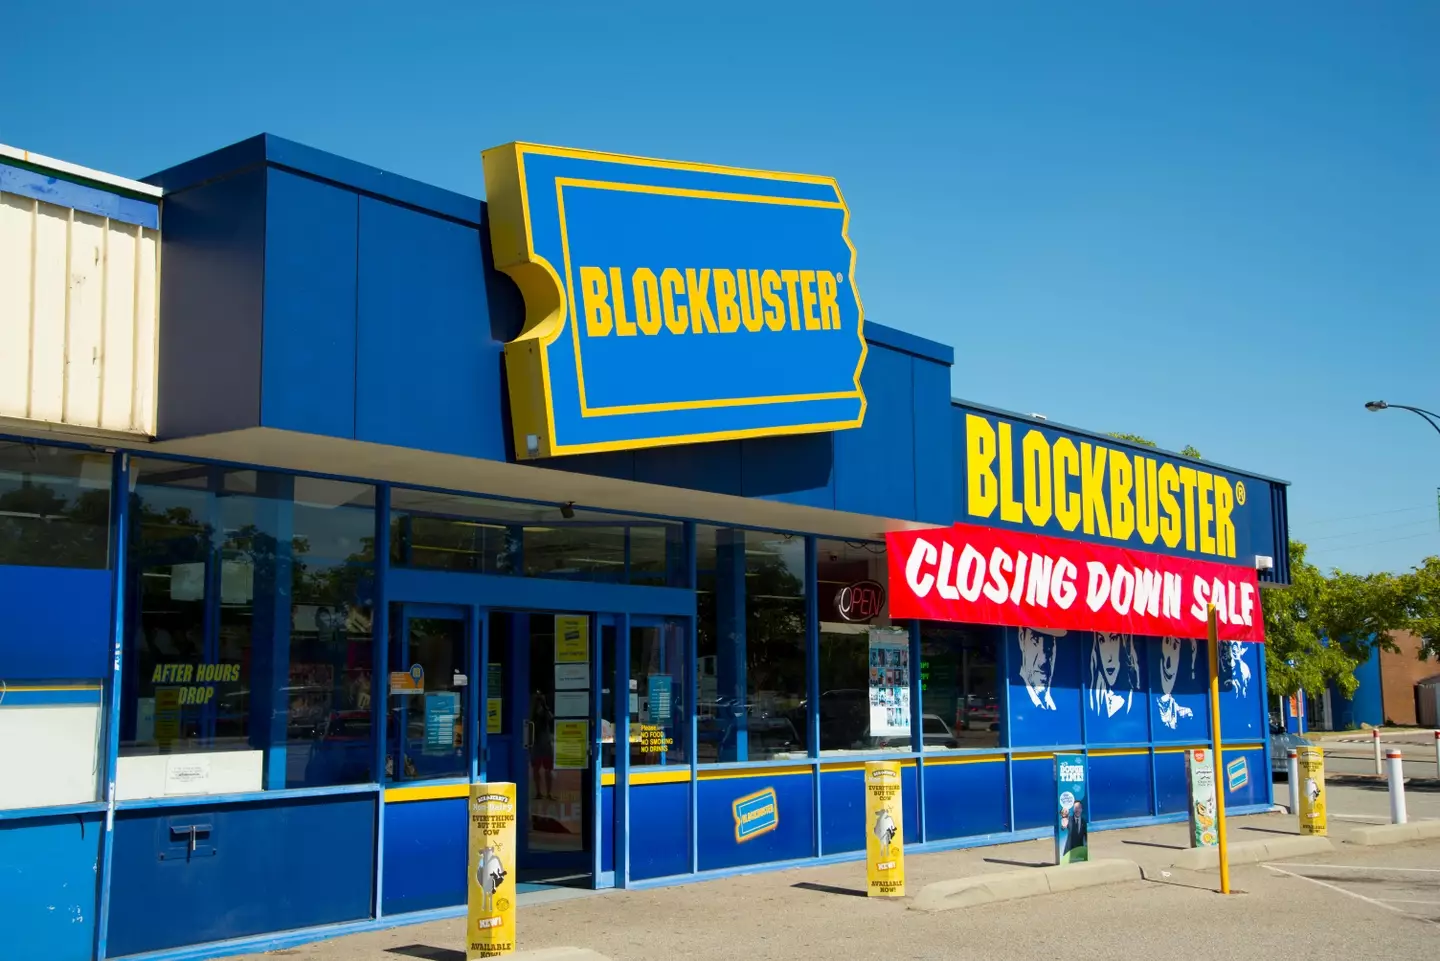 Blockbuster went into administration in 2013.